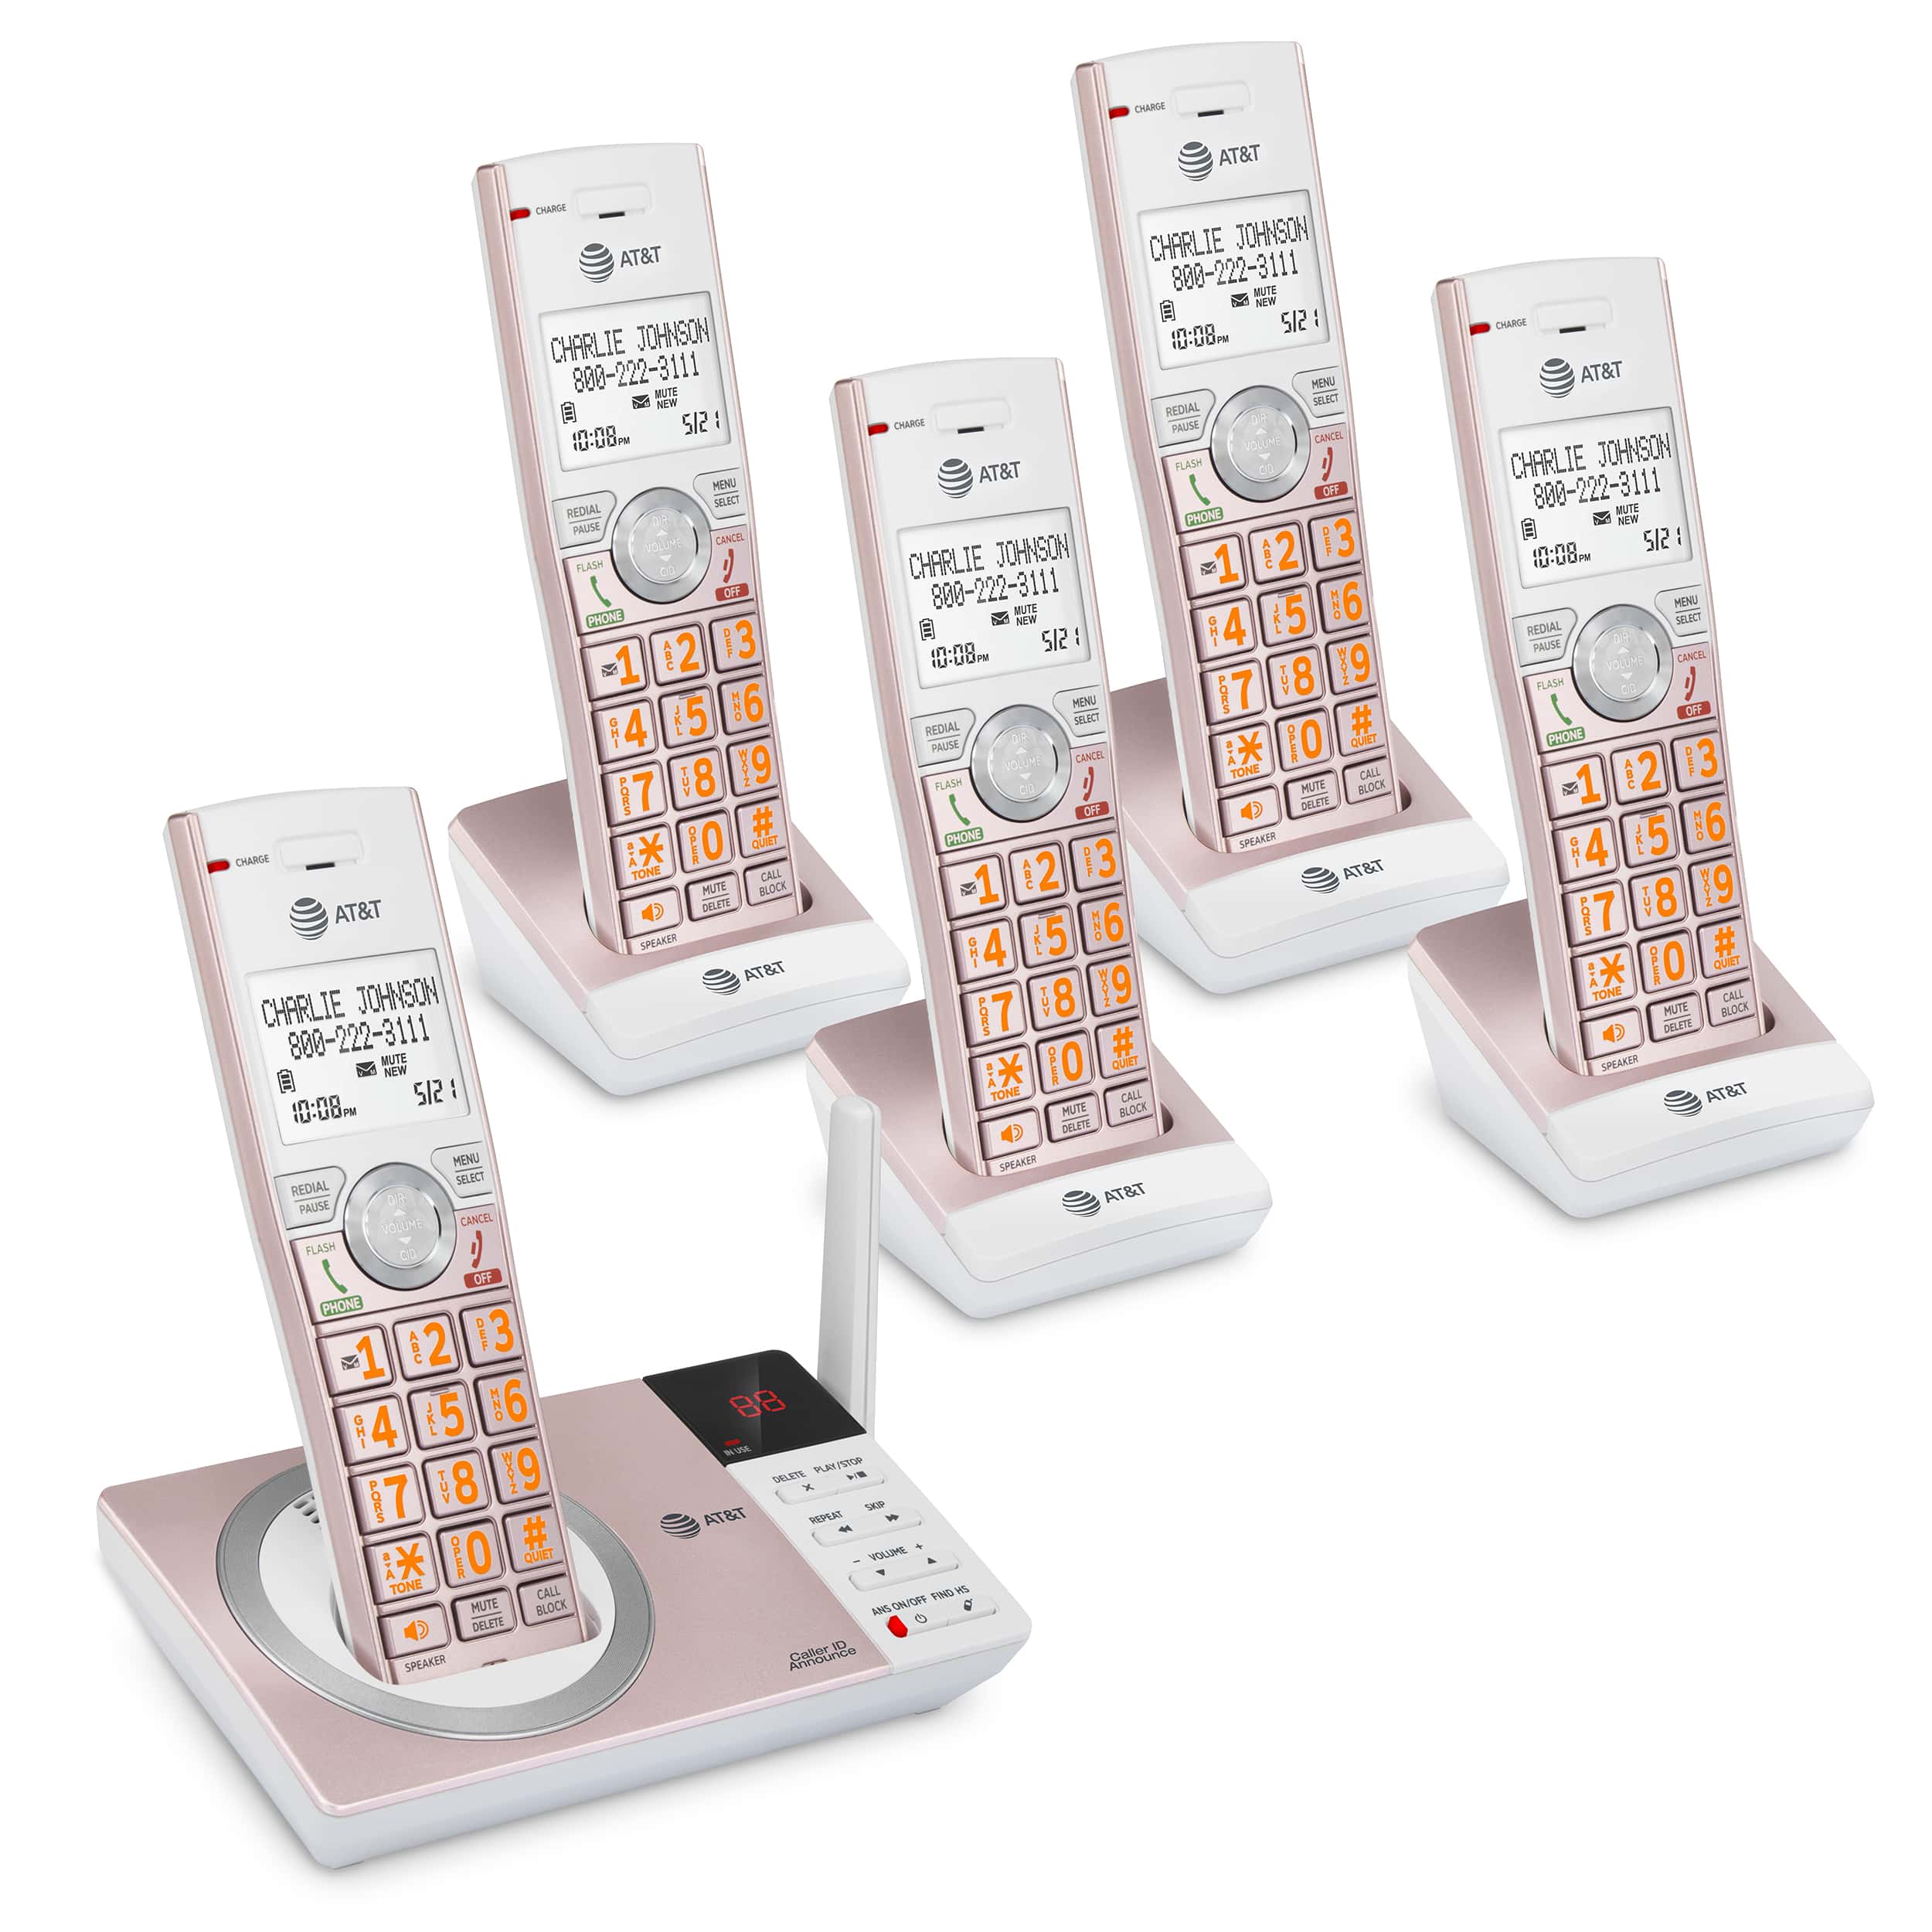 5 handset cordless answering system with smart call blocker - view 2